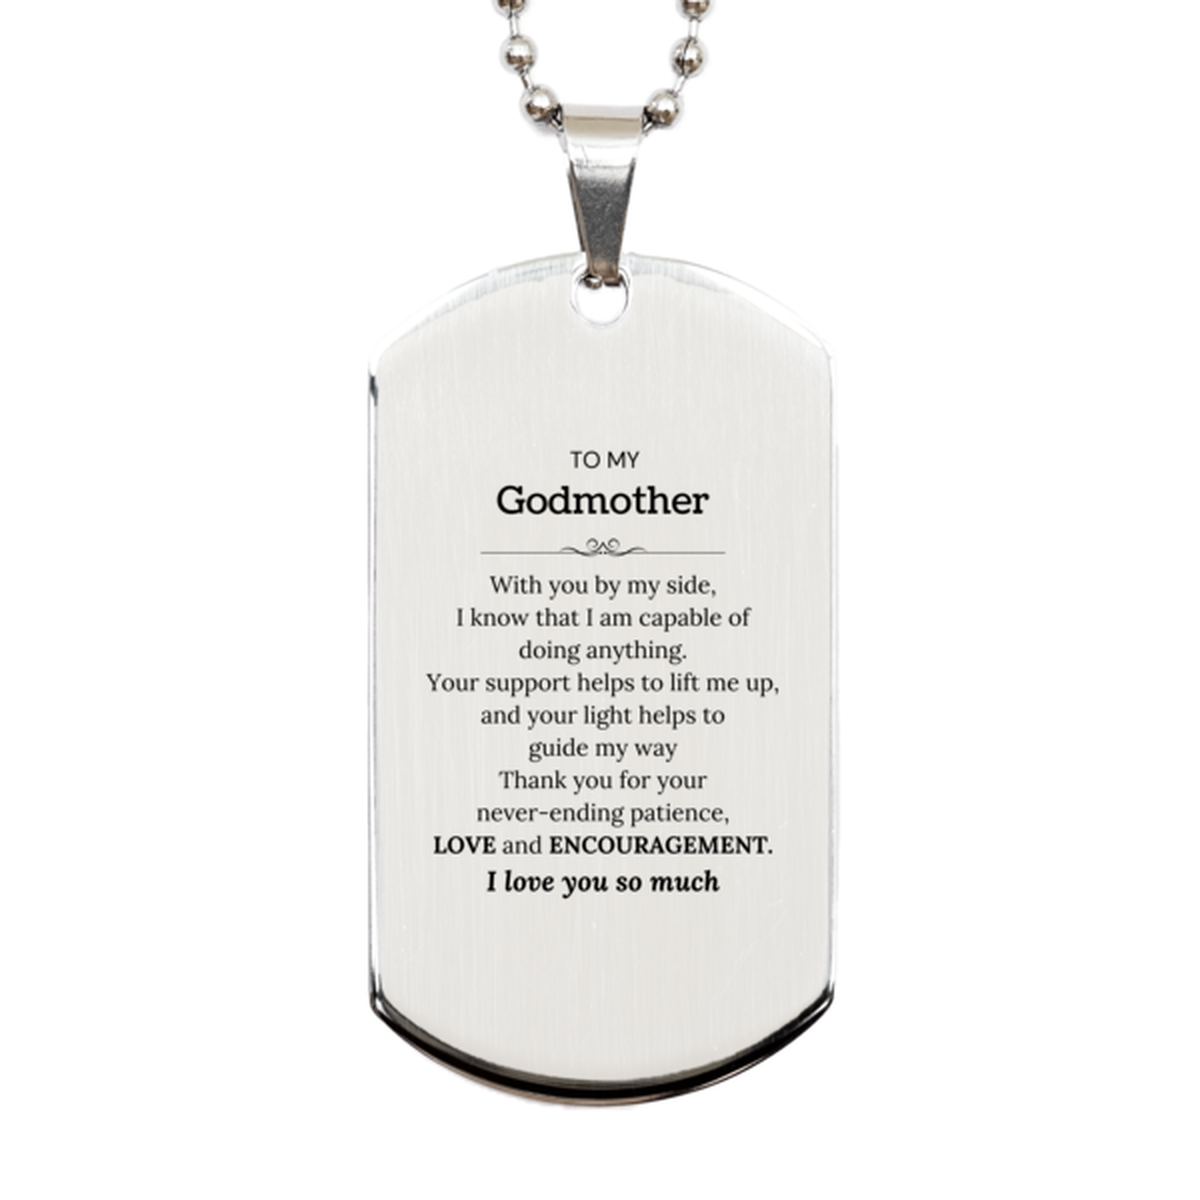 Appreciation Godmother Silver Dog Tag Gifts, To My Godmother Birthday Christmas Wedding Keepsake Gifts for Godmother With you by my side, I know that I am capable of doing anything. I love you so much